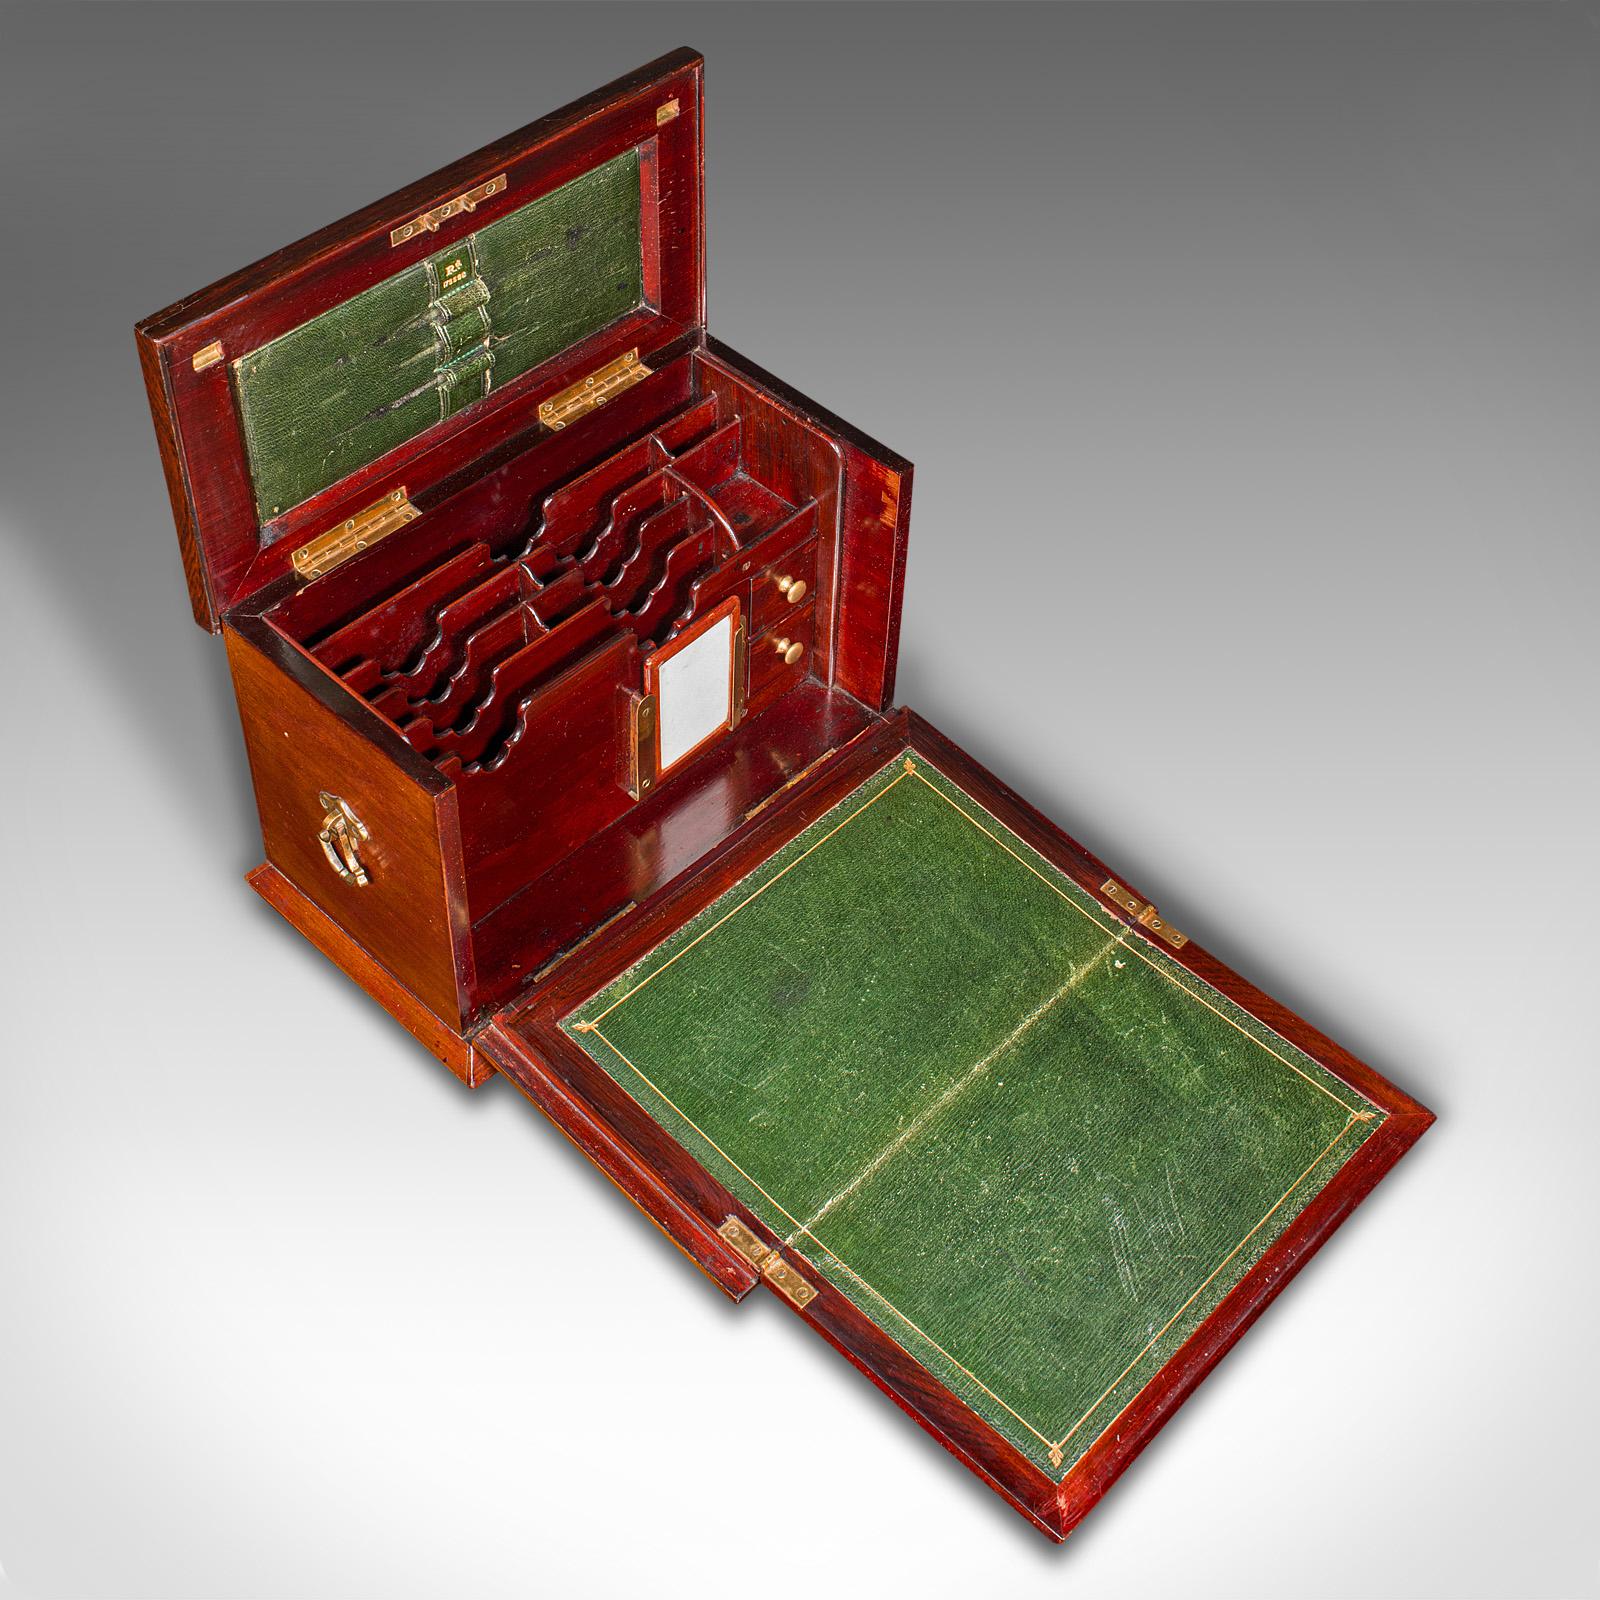 Antique Travelling Author's Writing Box, English, Correspondence Case, Victorian For Sale 2